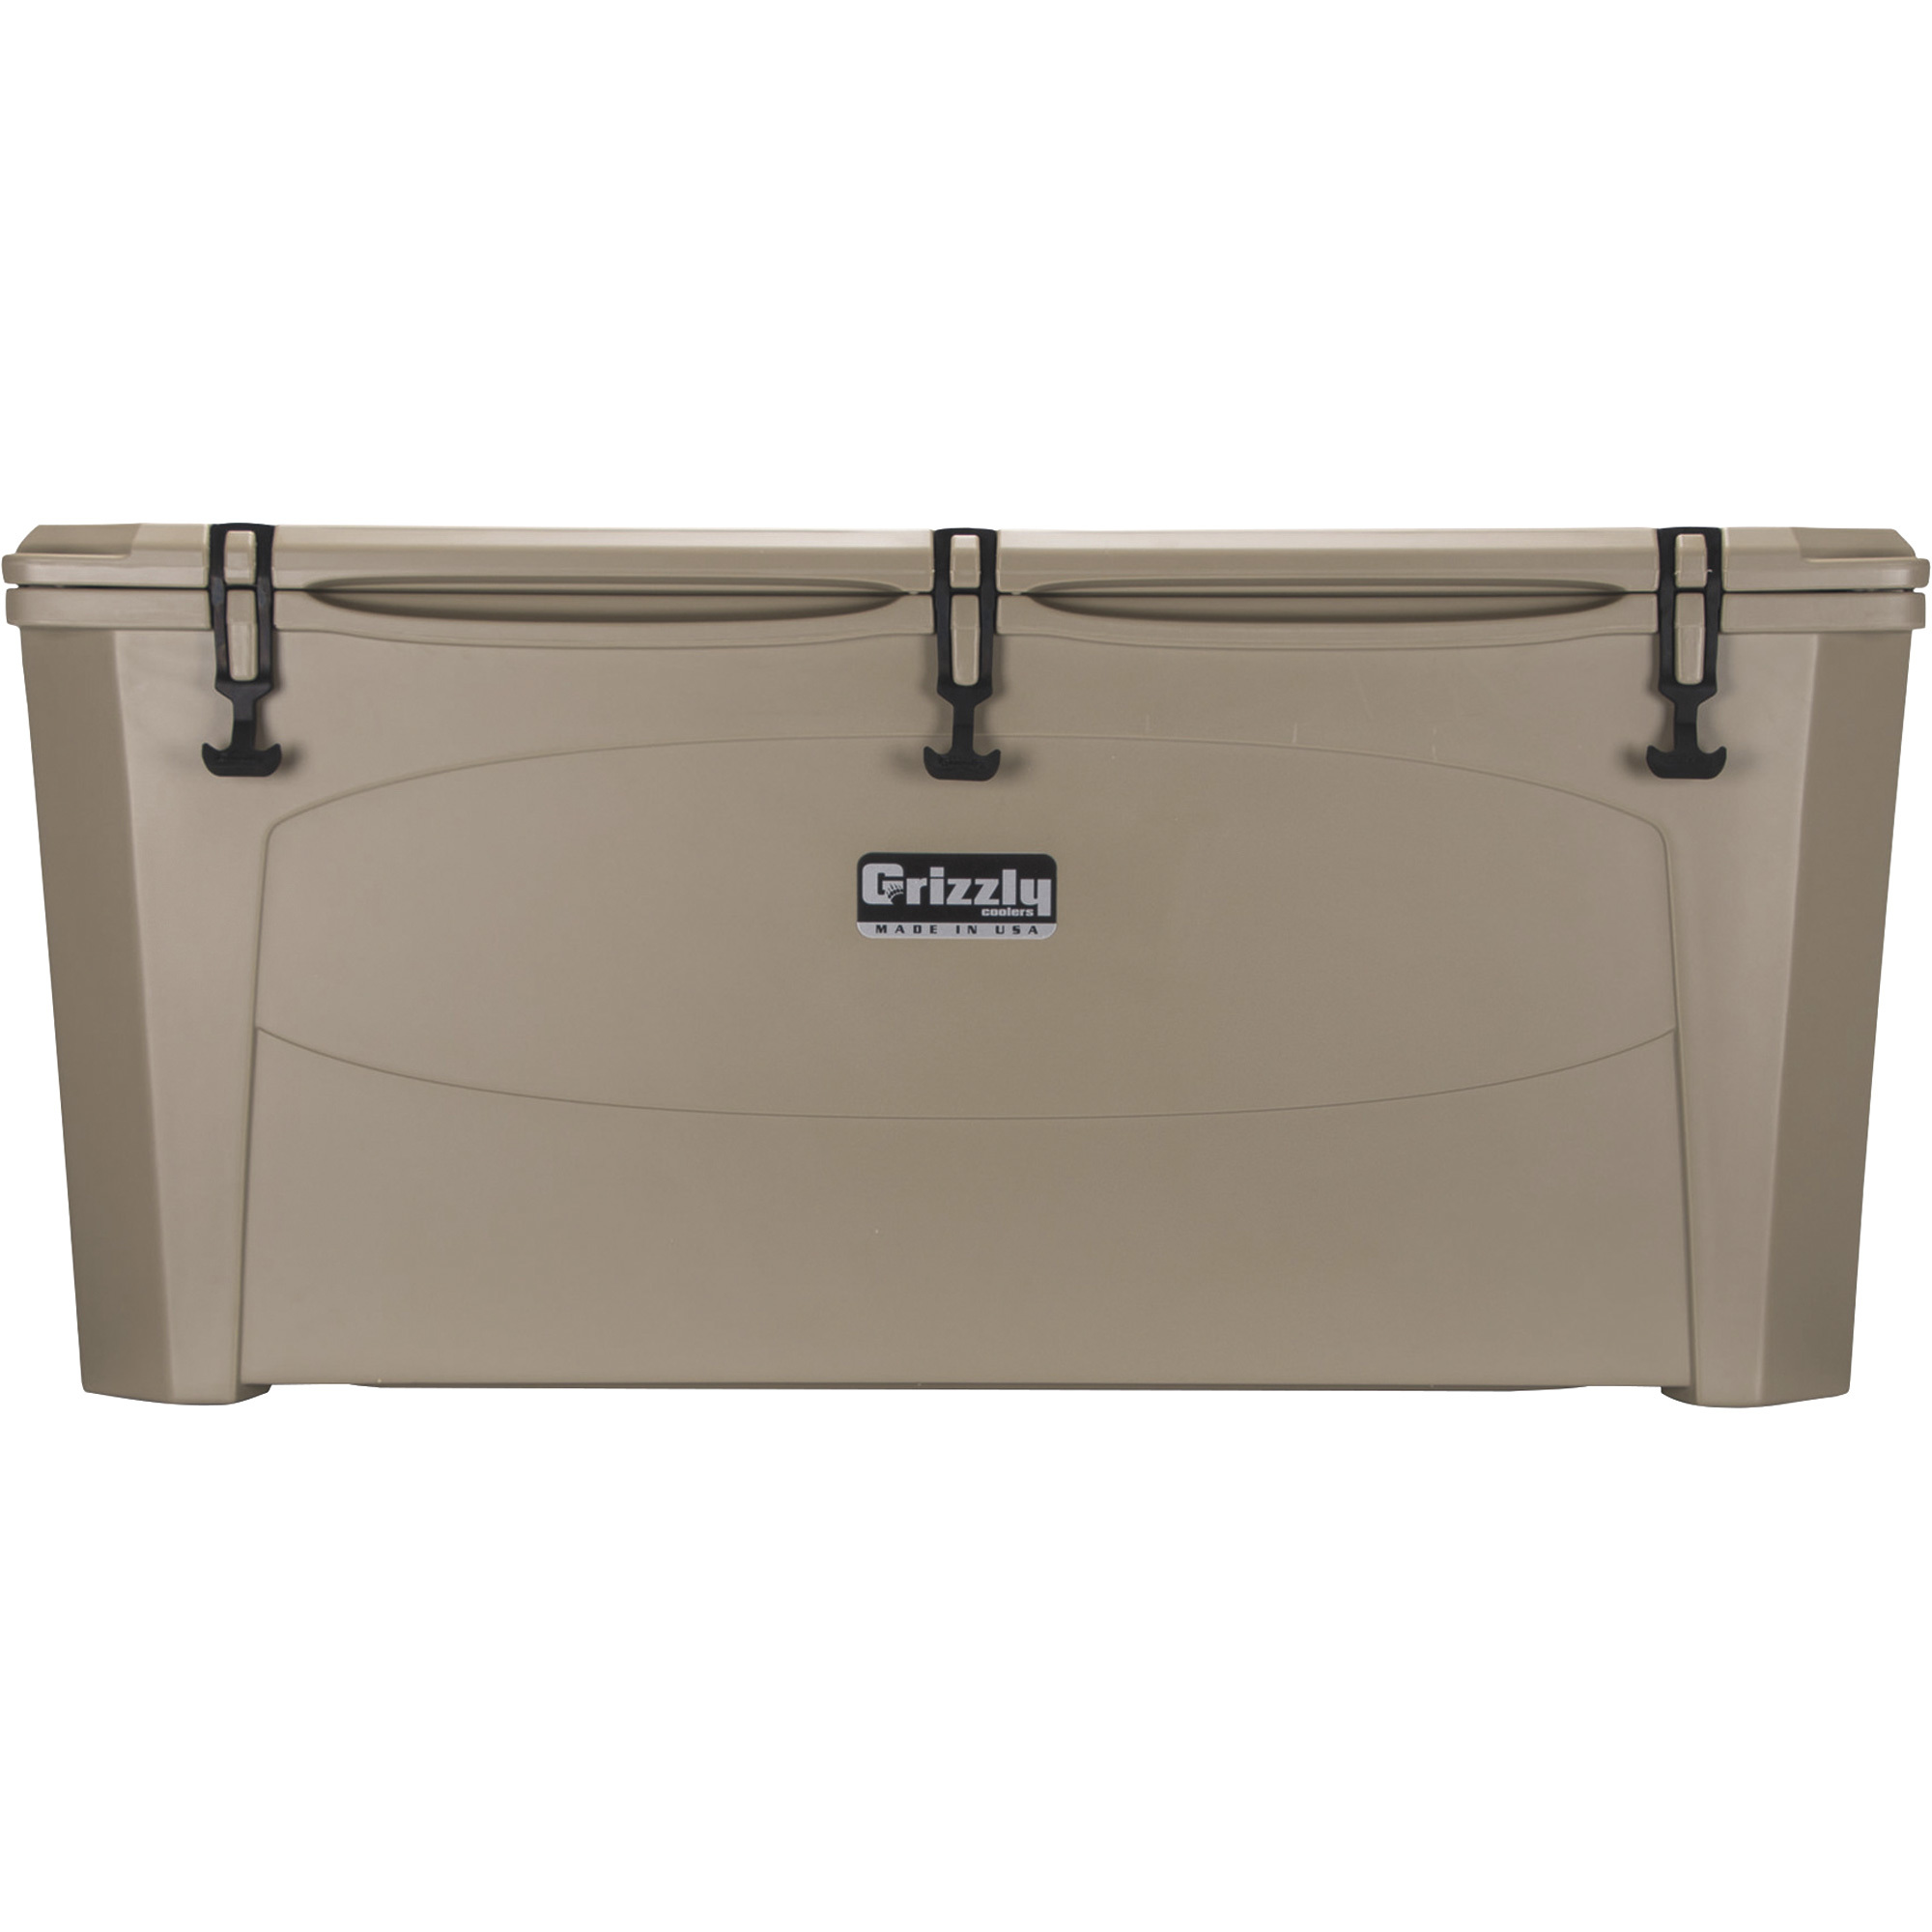 Grizzly Coolers 400800